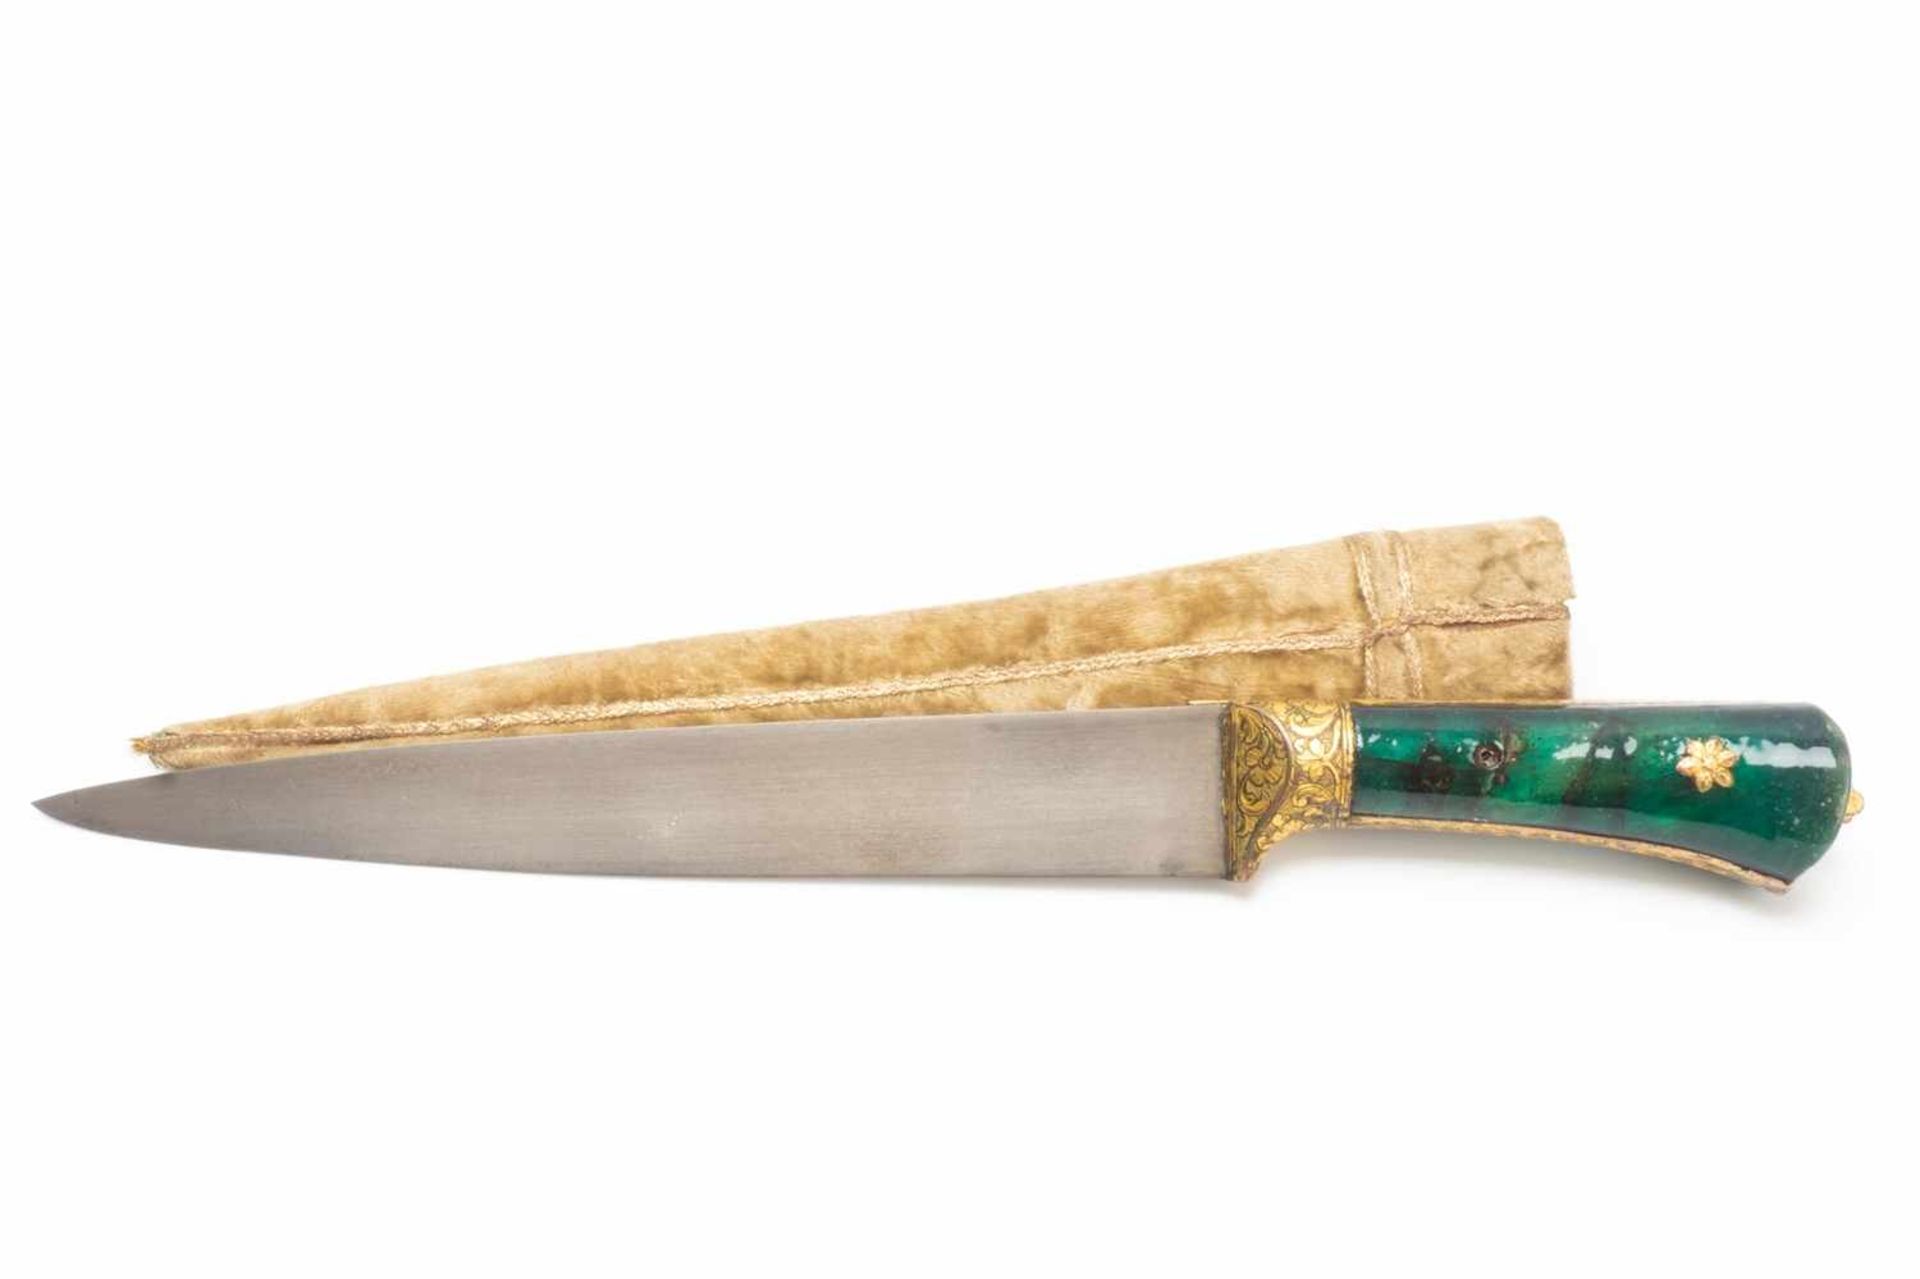 Ornate Indian dagger, pesh-kabz with scabbard